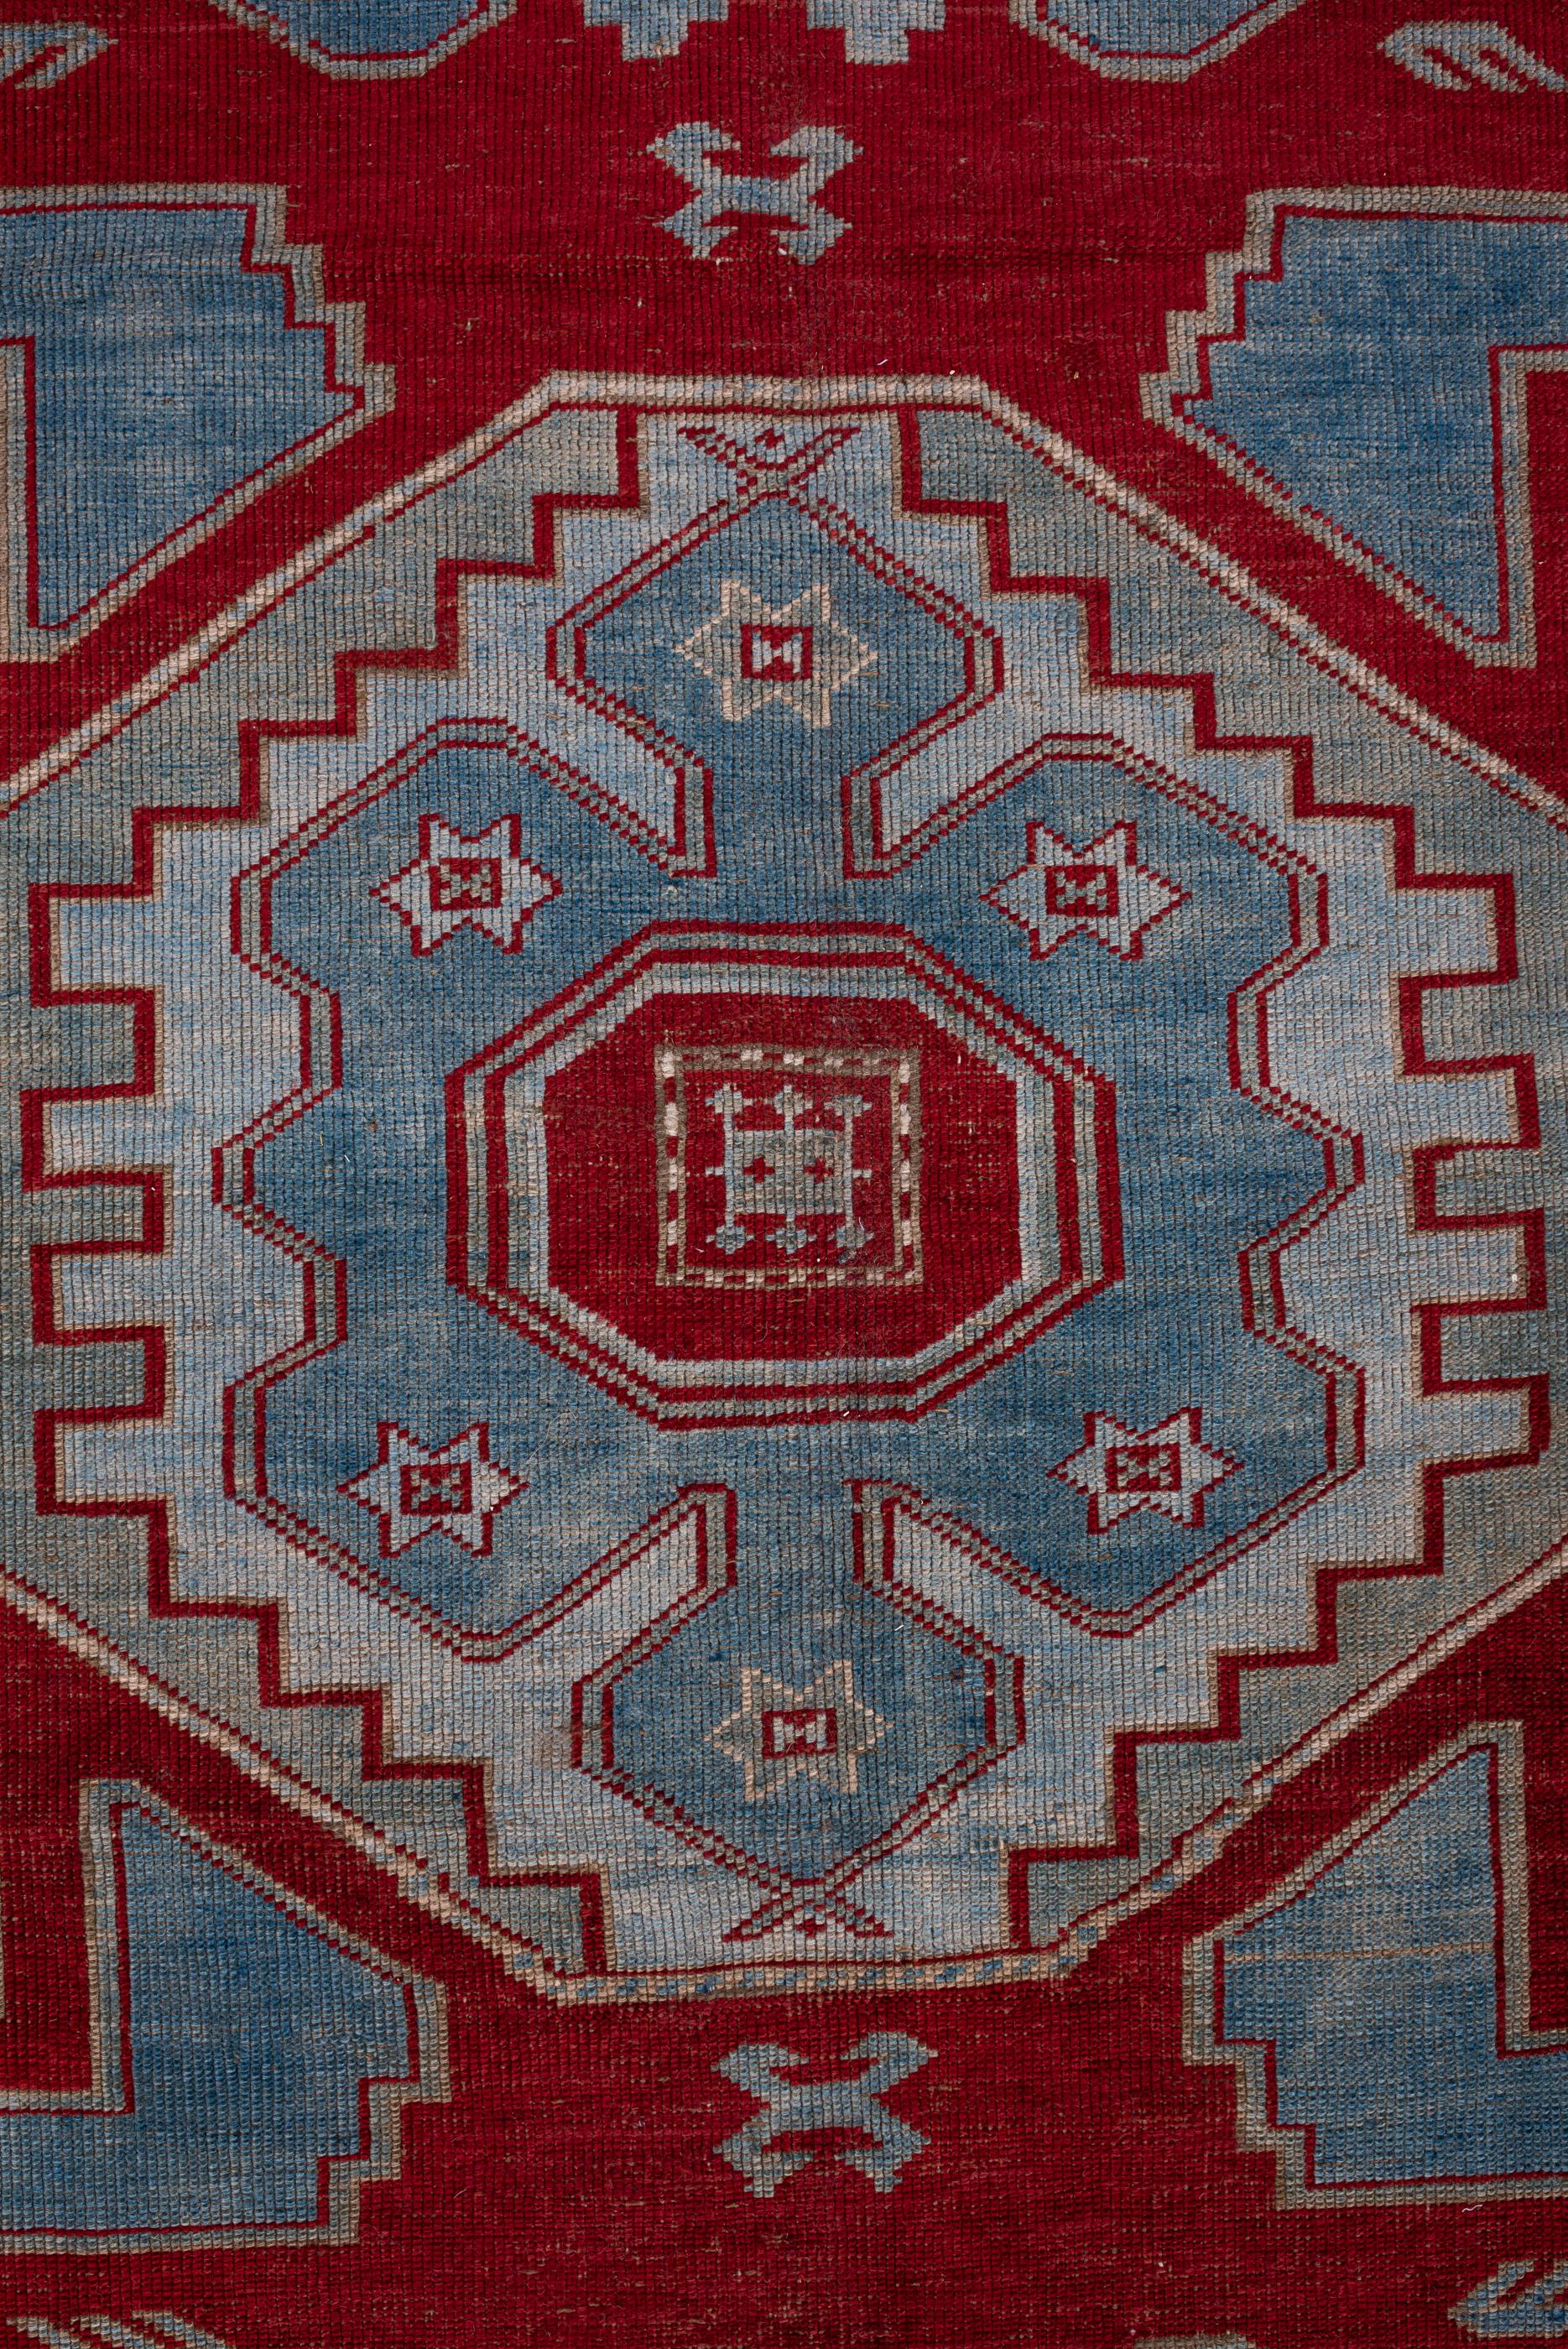 Hand-Knotted Antique Kazak Rug with Bold Red Border and Blue Field